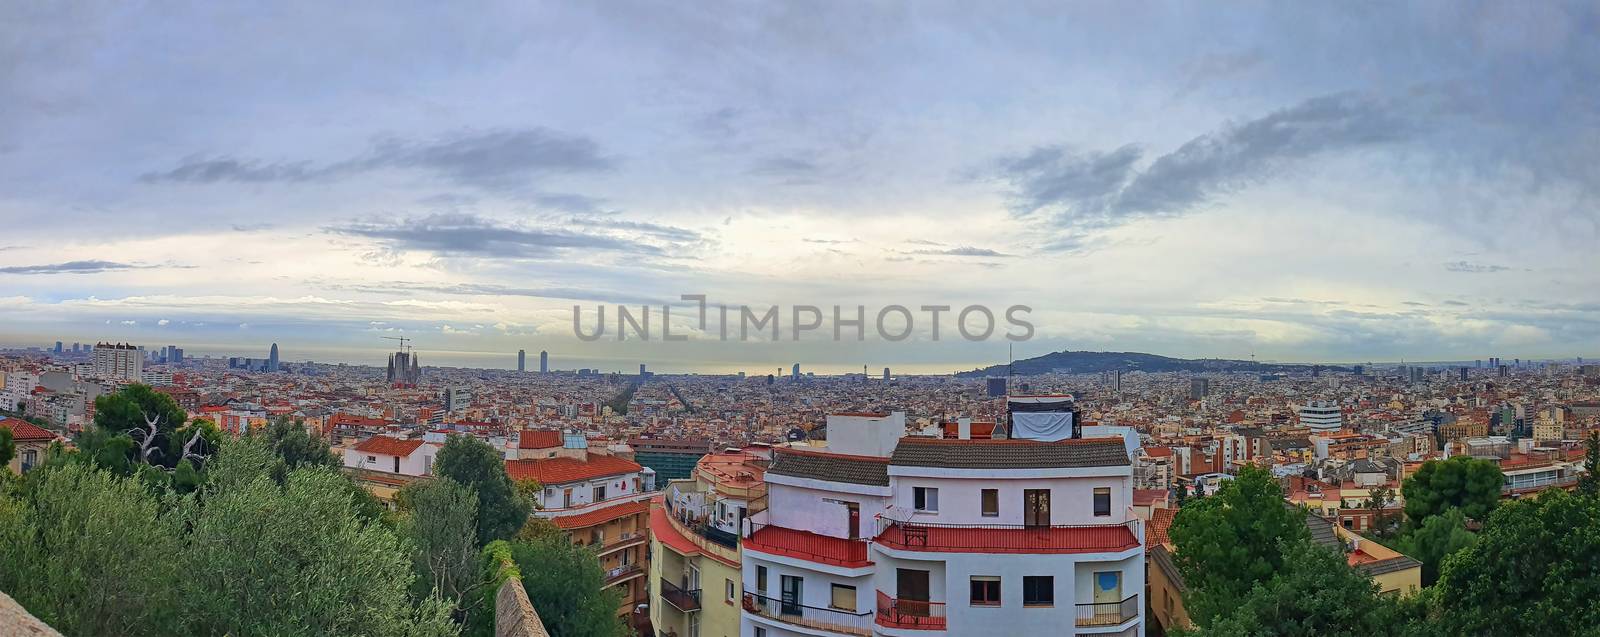 Cityscape of Barcelona from Guell viewpoint by savcoco